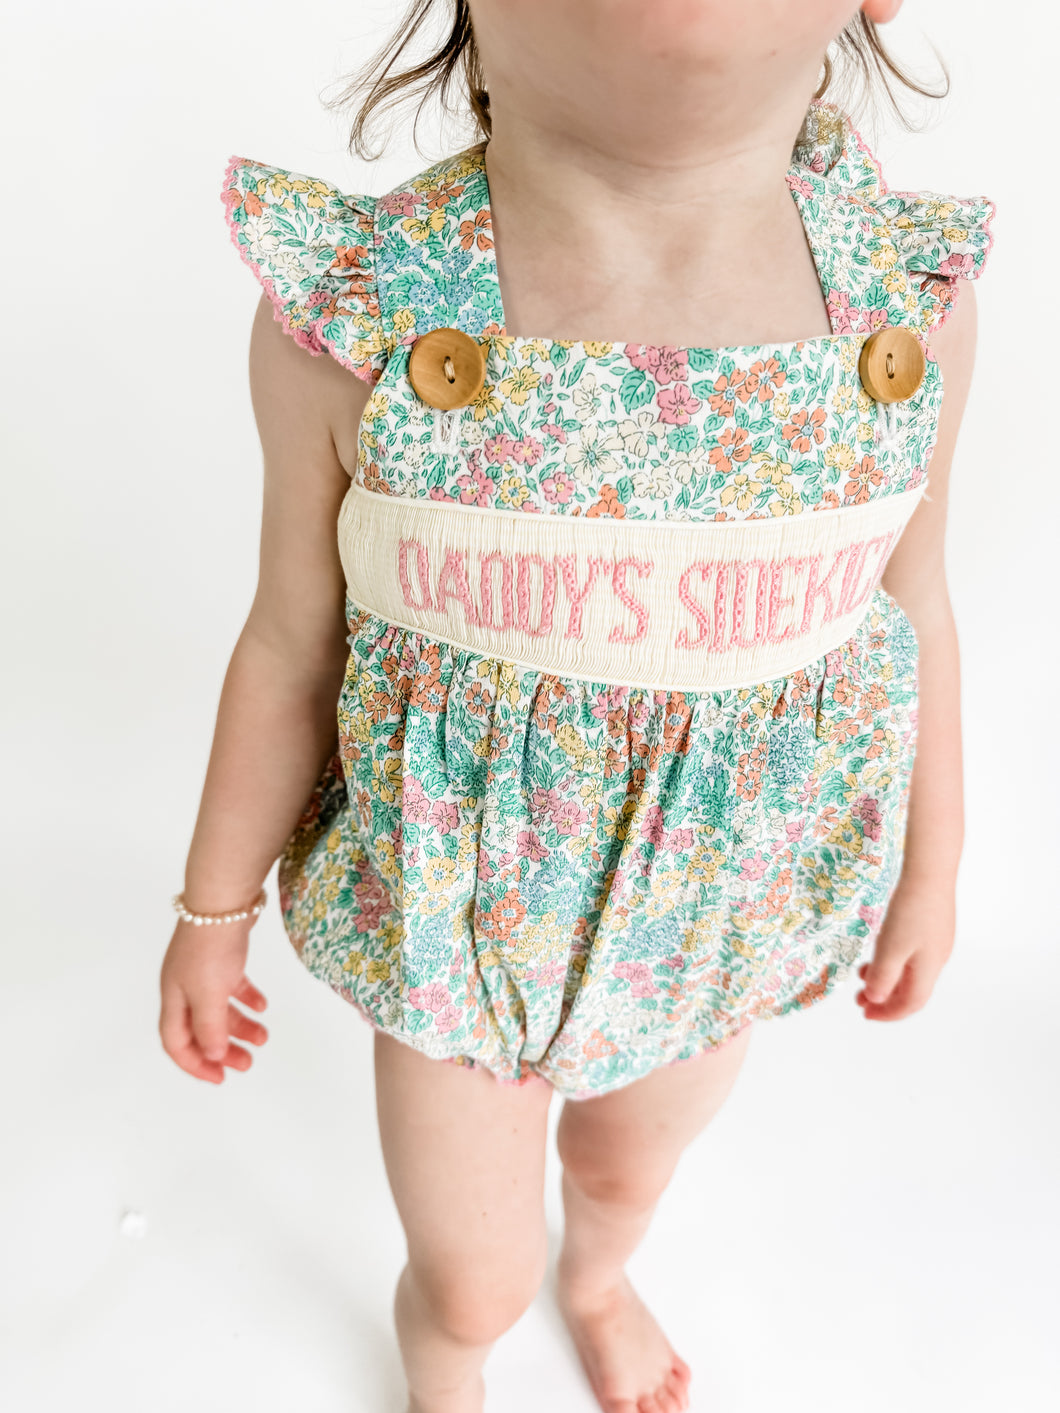 Girls Darling Days “DADDY’S GIRL” Smocked Bubble